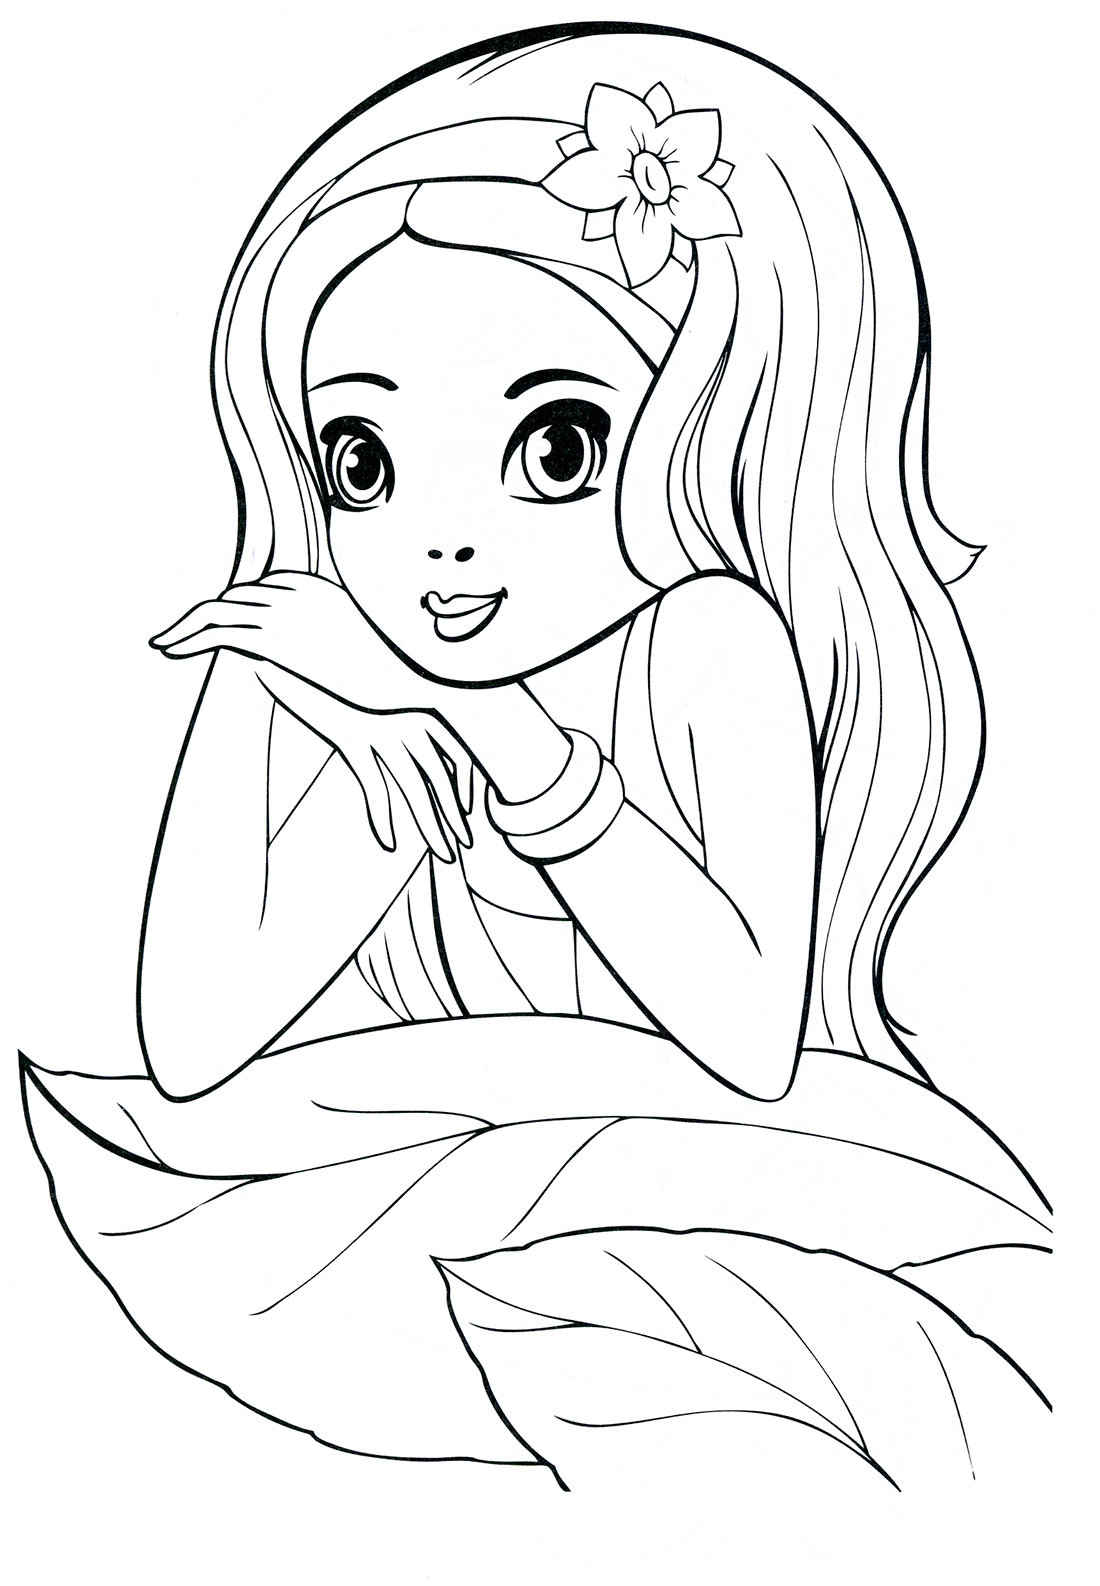 Coloring Books For Girls
 Coloring pages for 8 9 10 year old girls to and